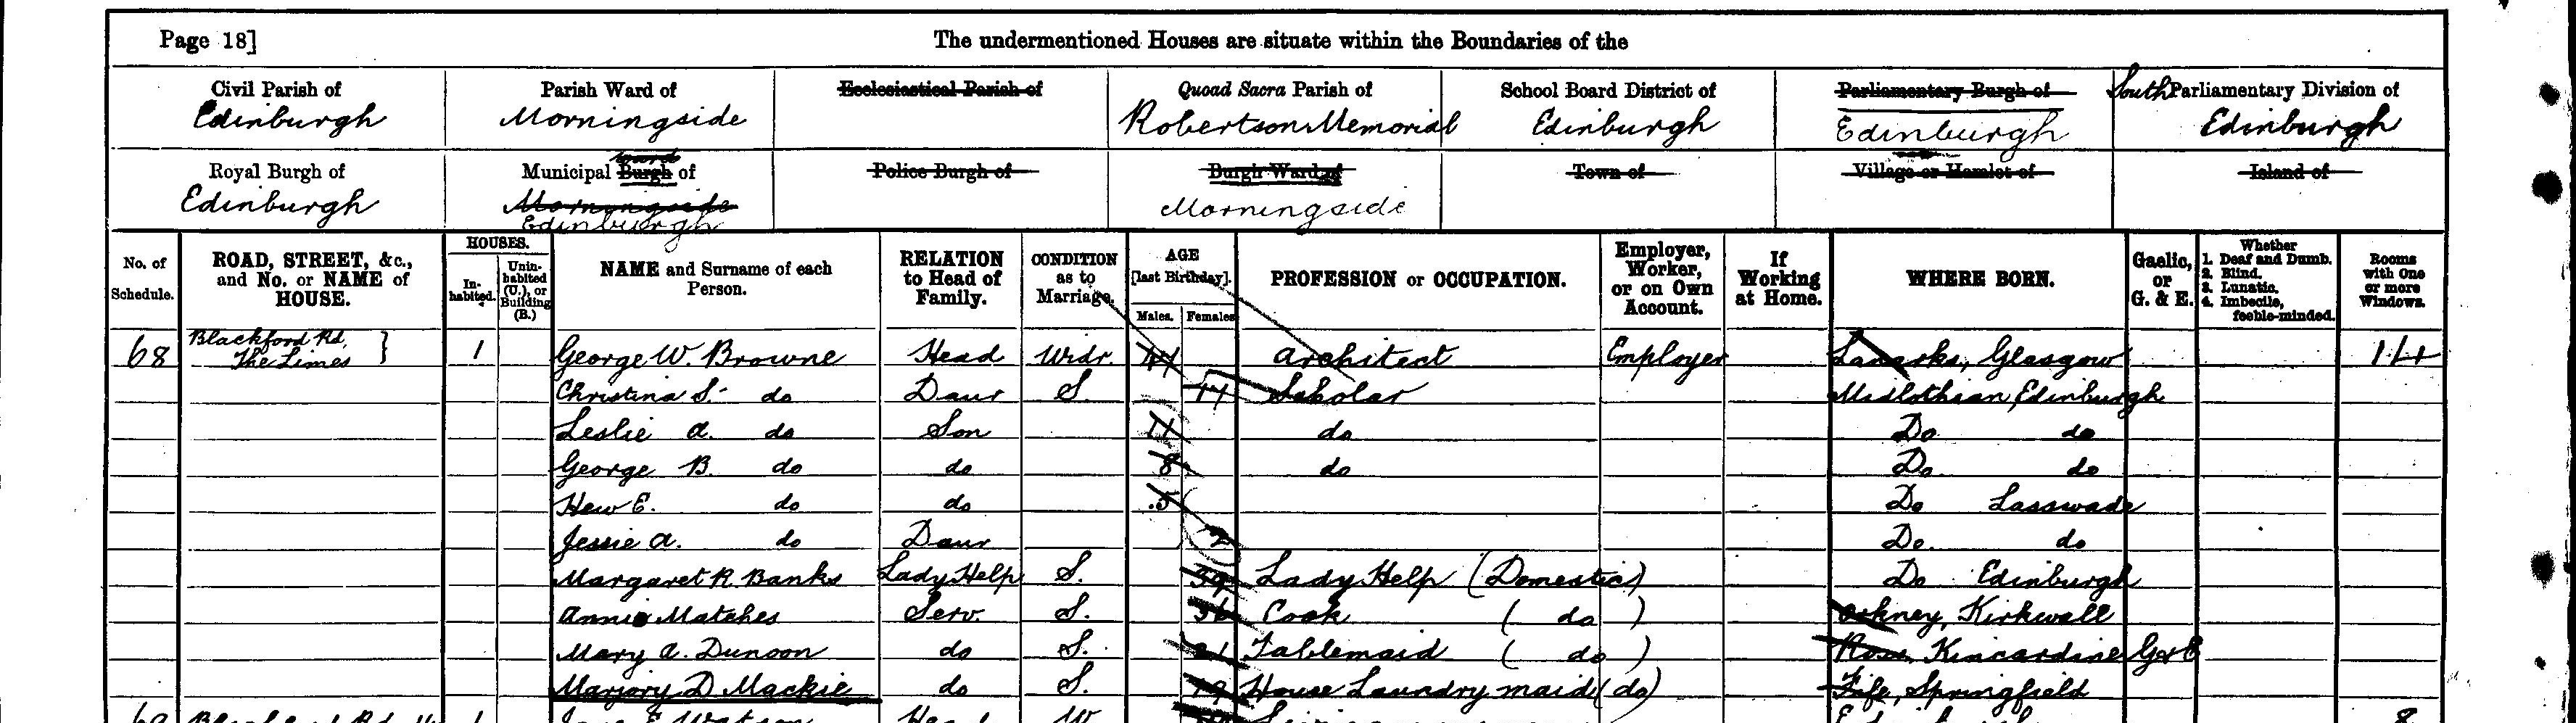 Entry in the 1901 census for George Washington Browne and his family (National Records of Scotland, Census 1901, 685/5 108 p.18) 